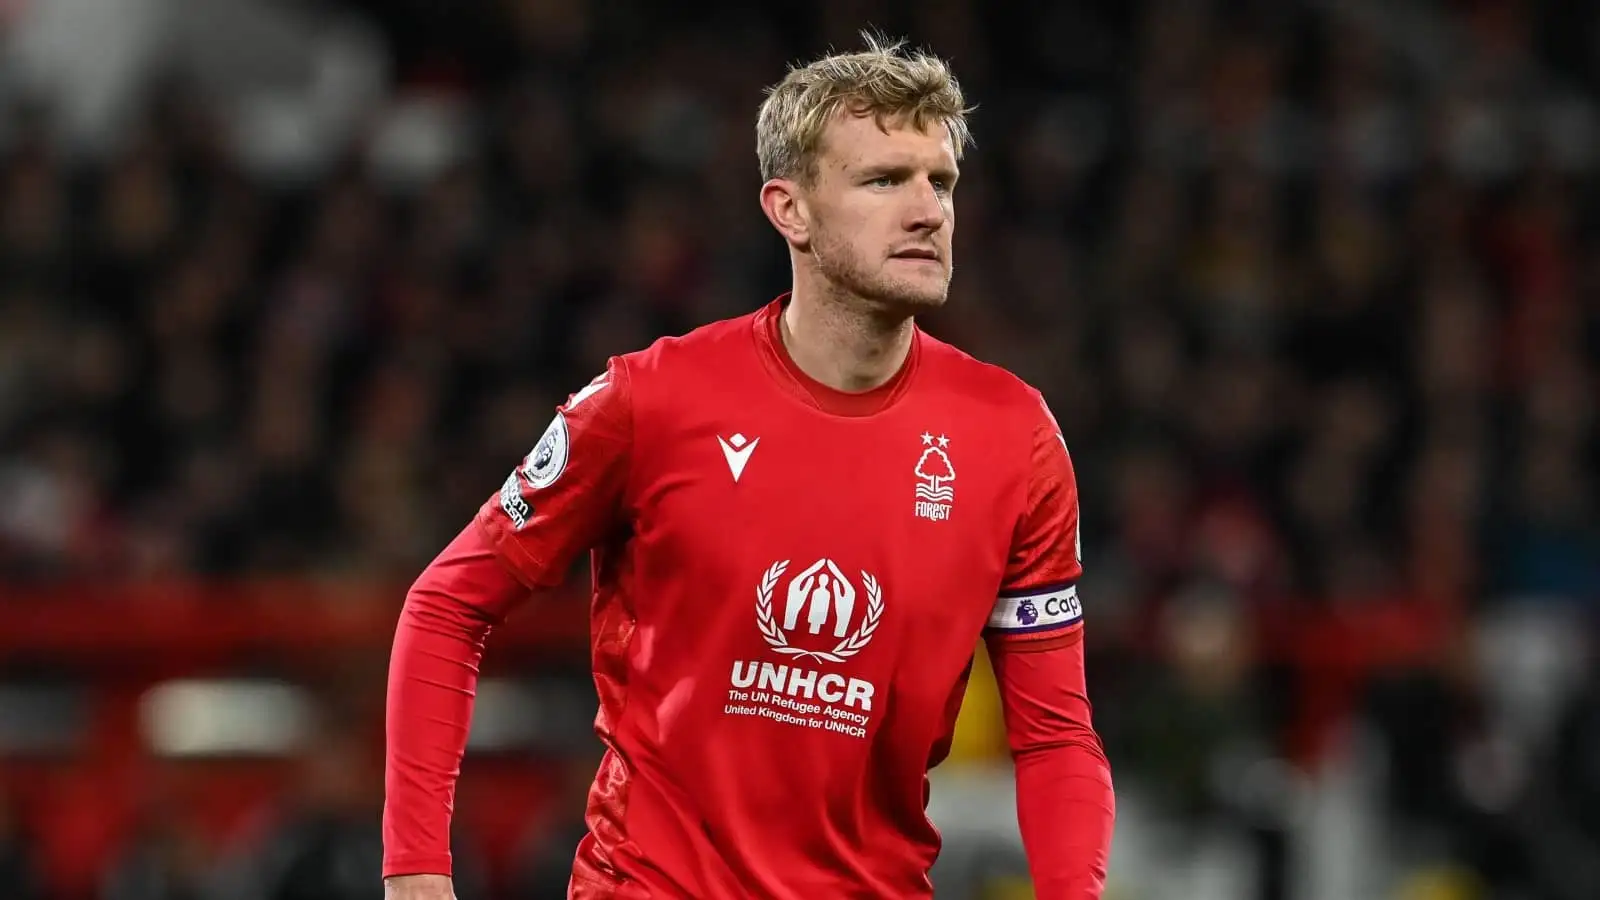 Sources: Nott'm Forest successful in tying down key star as Joe Worrall  agrees new contract